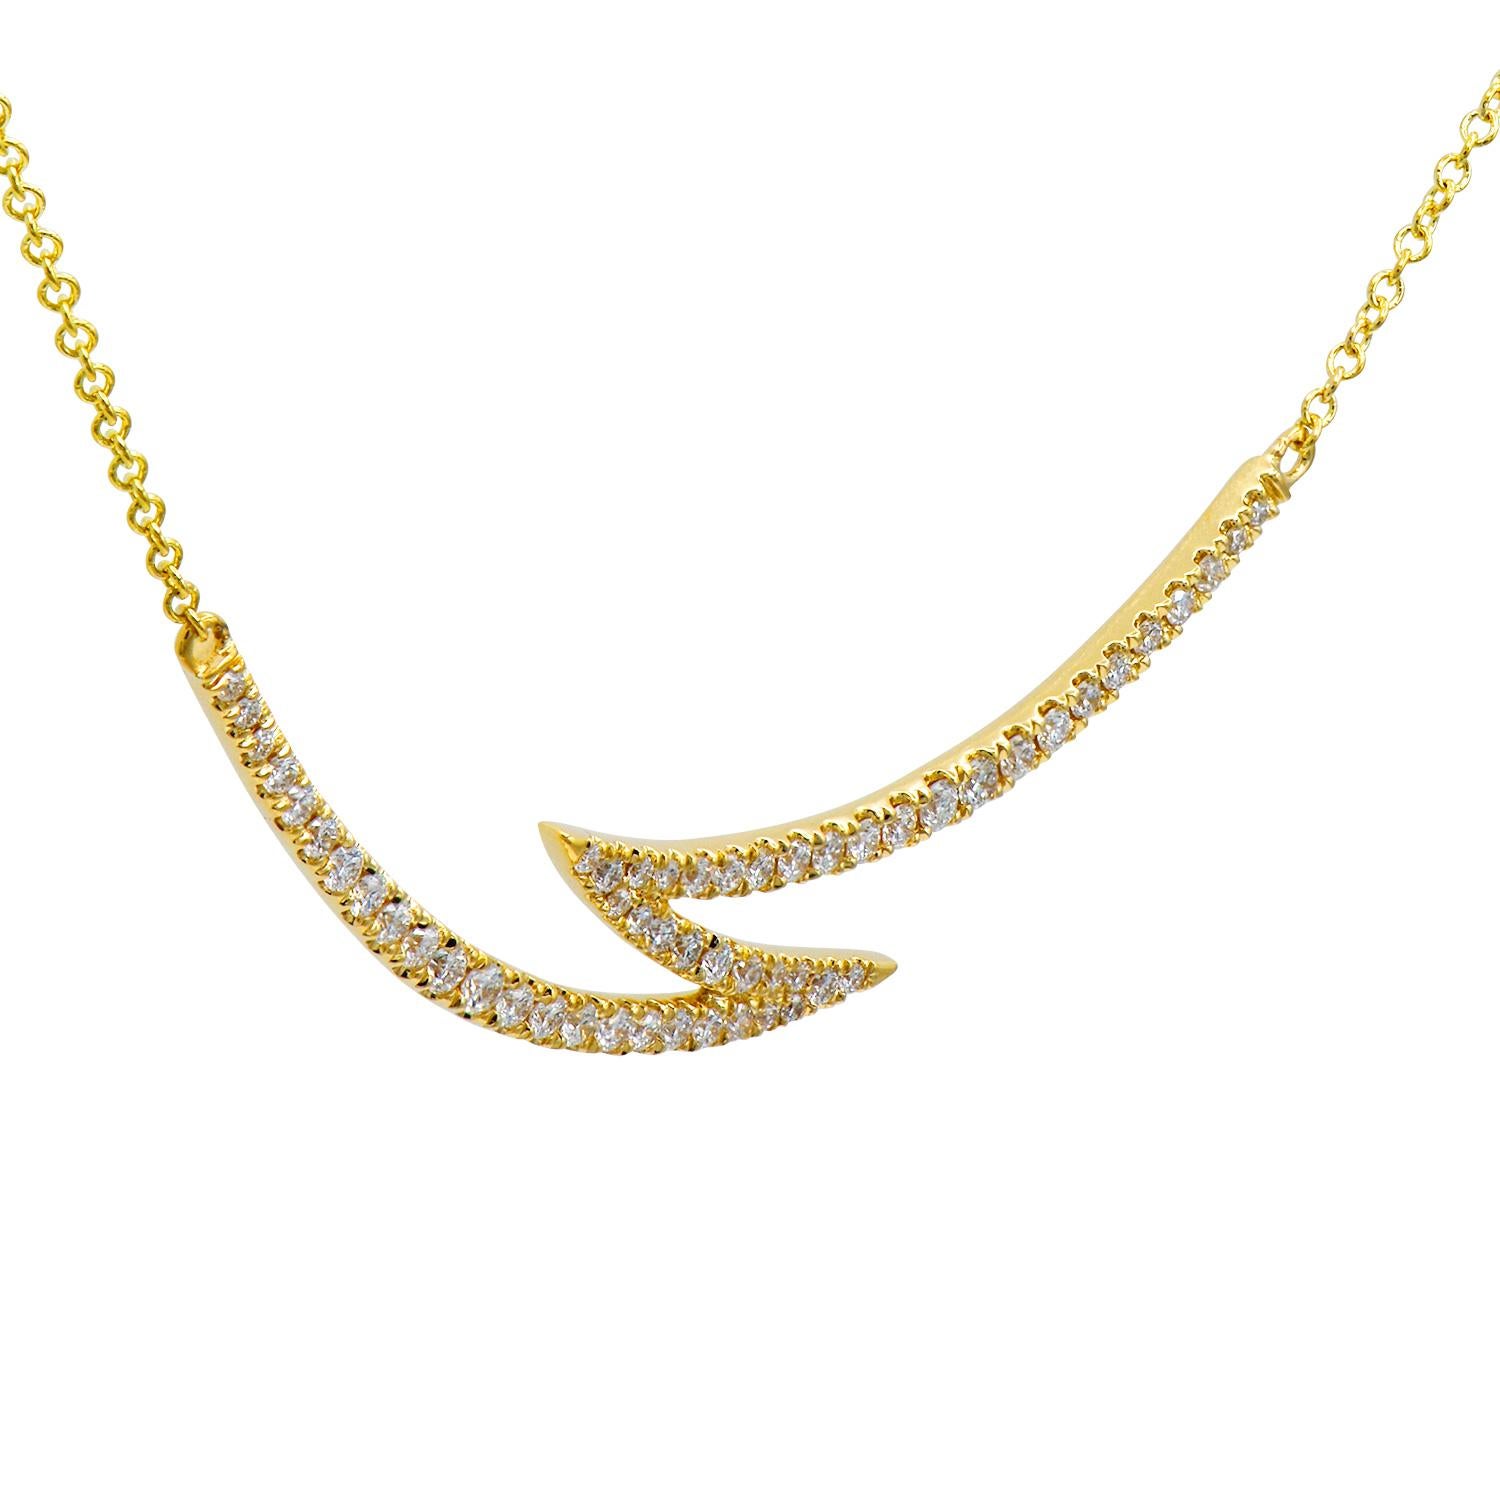 This yellow gold necklace looks like a curved bolt of lightning and is sure to brighten someone's day. The lightning bolt is covered with 54 round VS2. G color diamonds totaling 0.33 carats which are set in 2.9 grams of 18 karat yellow gold. This